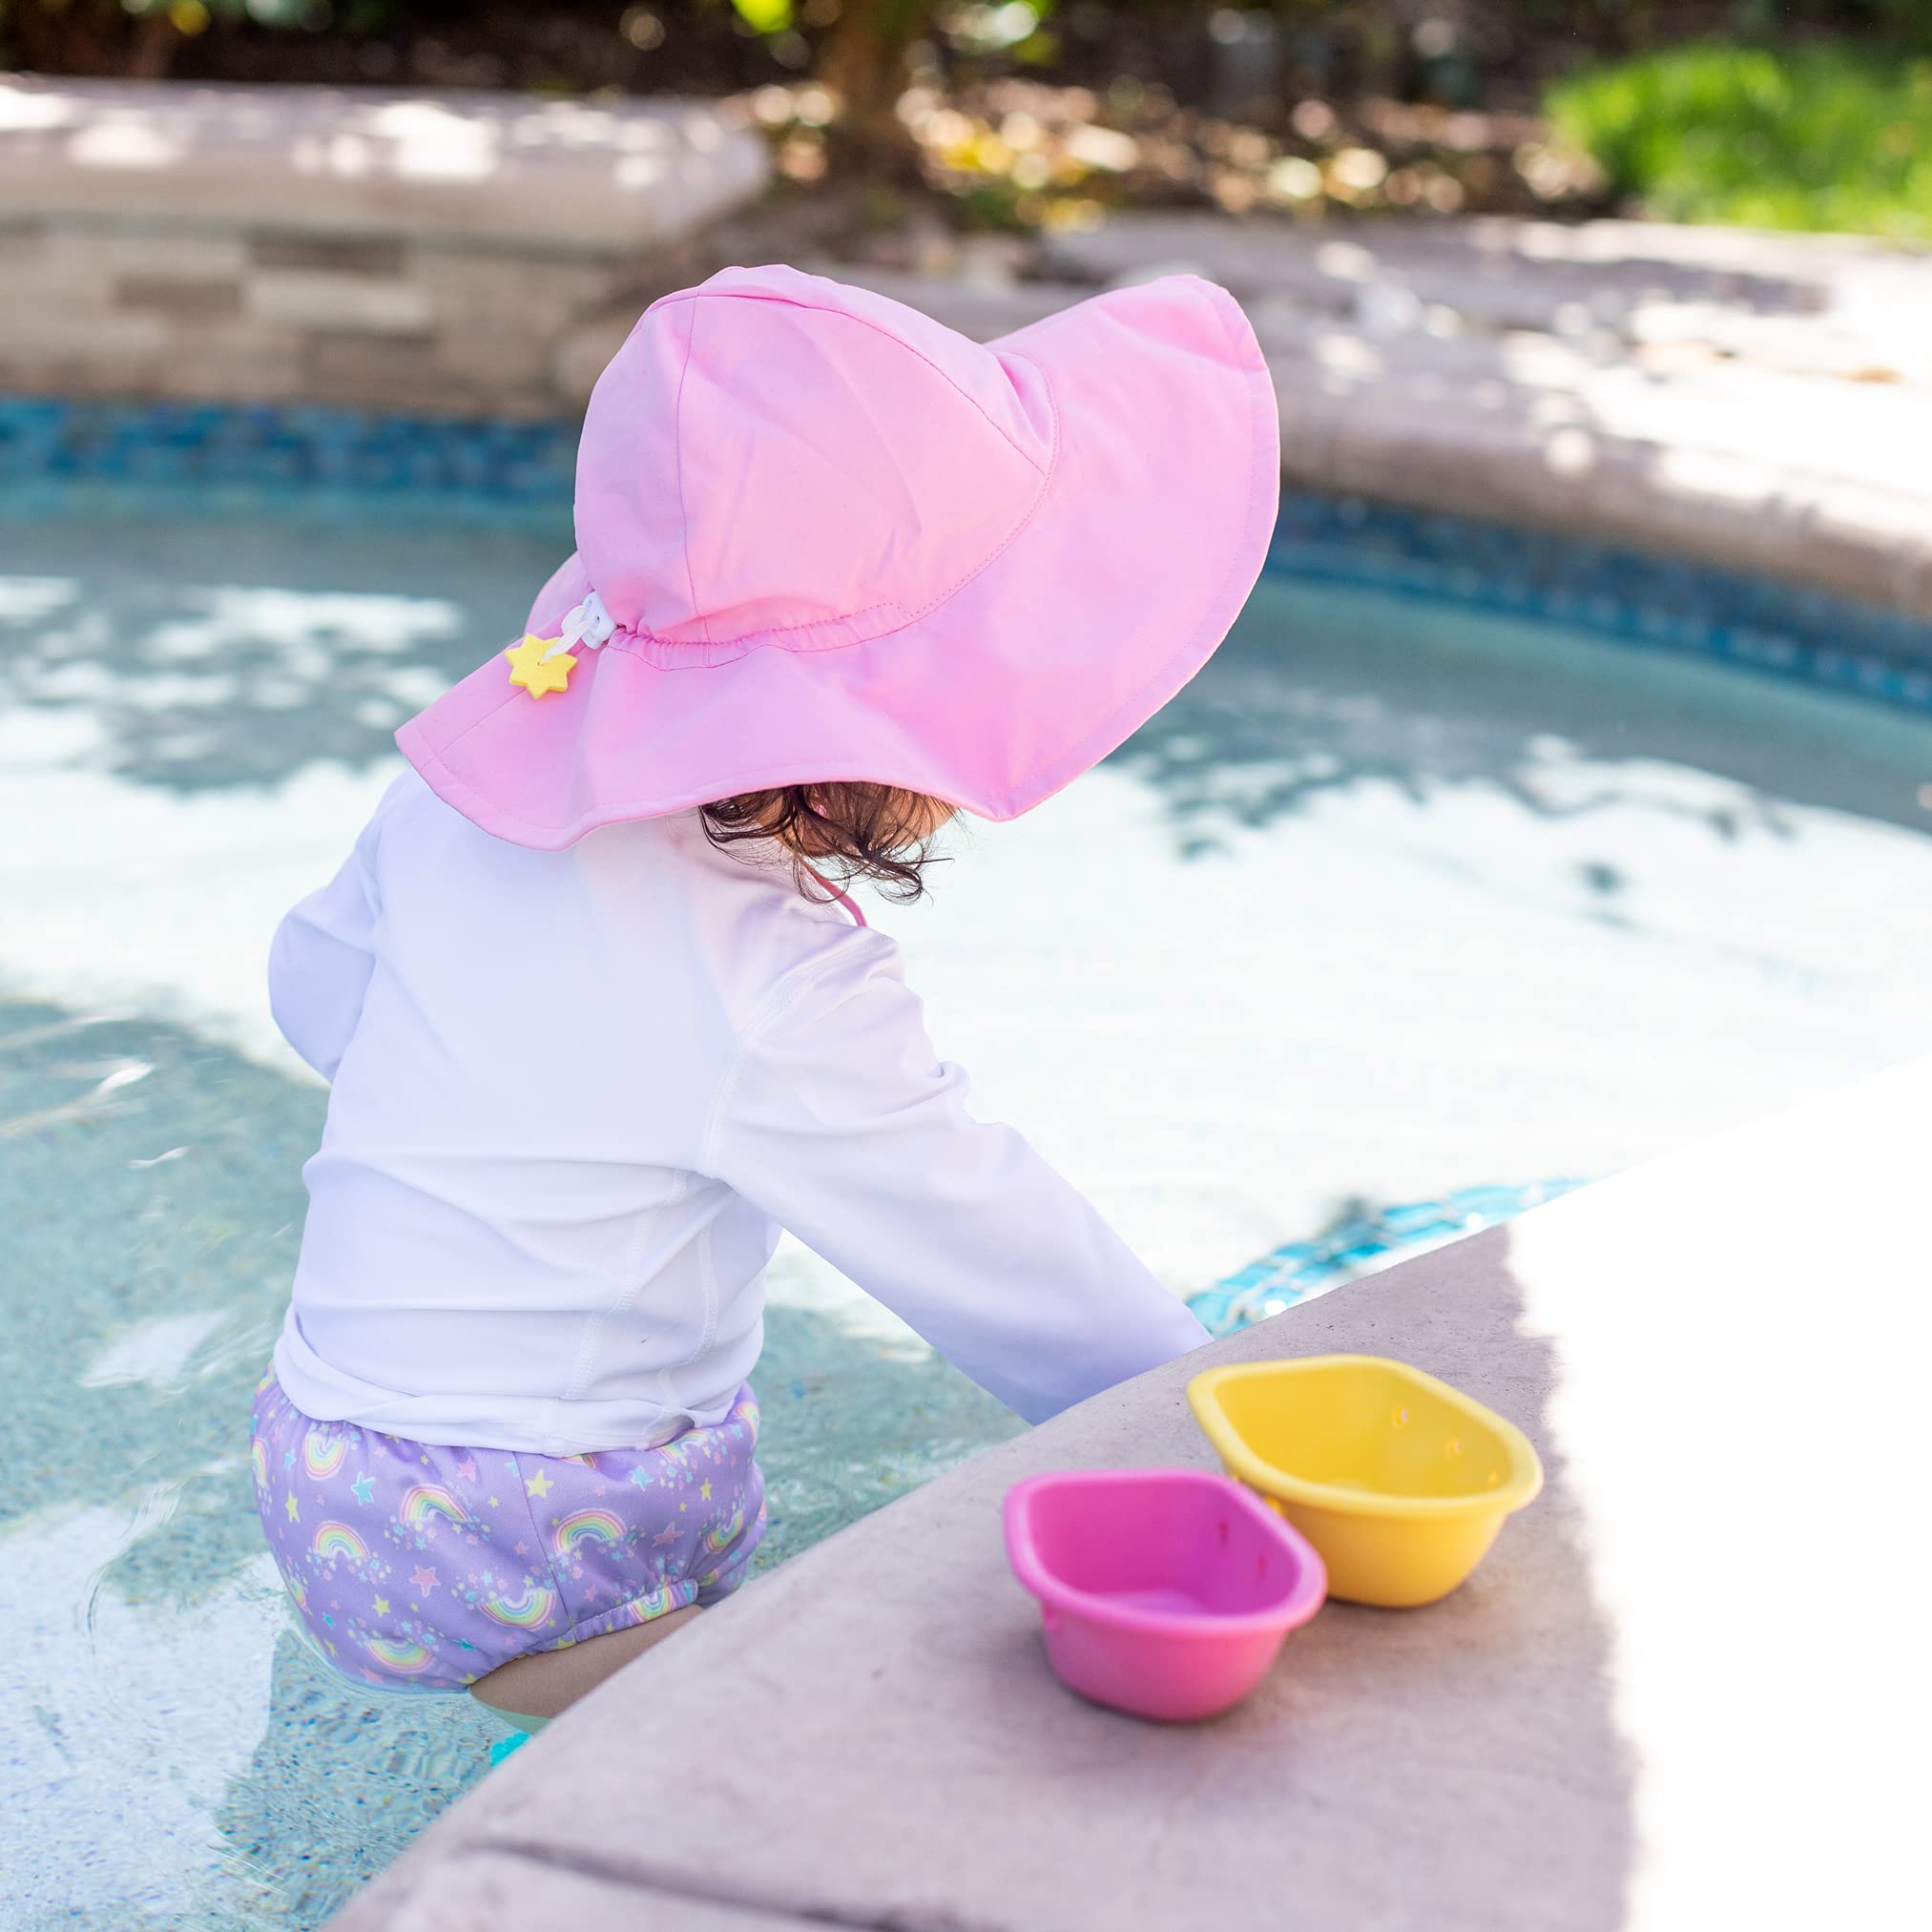 i play. Baby Girls' Brim Hat | All-Day UPF 50+ Sun Protection for Head, Neck, & Eyes